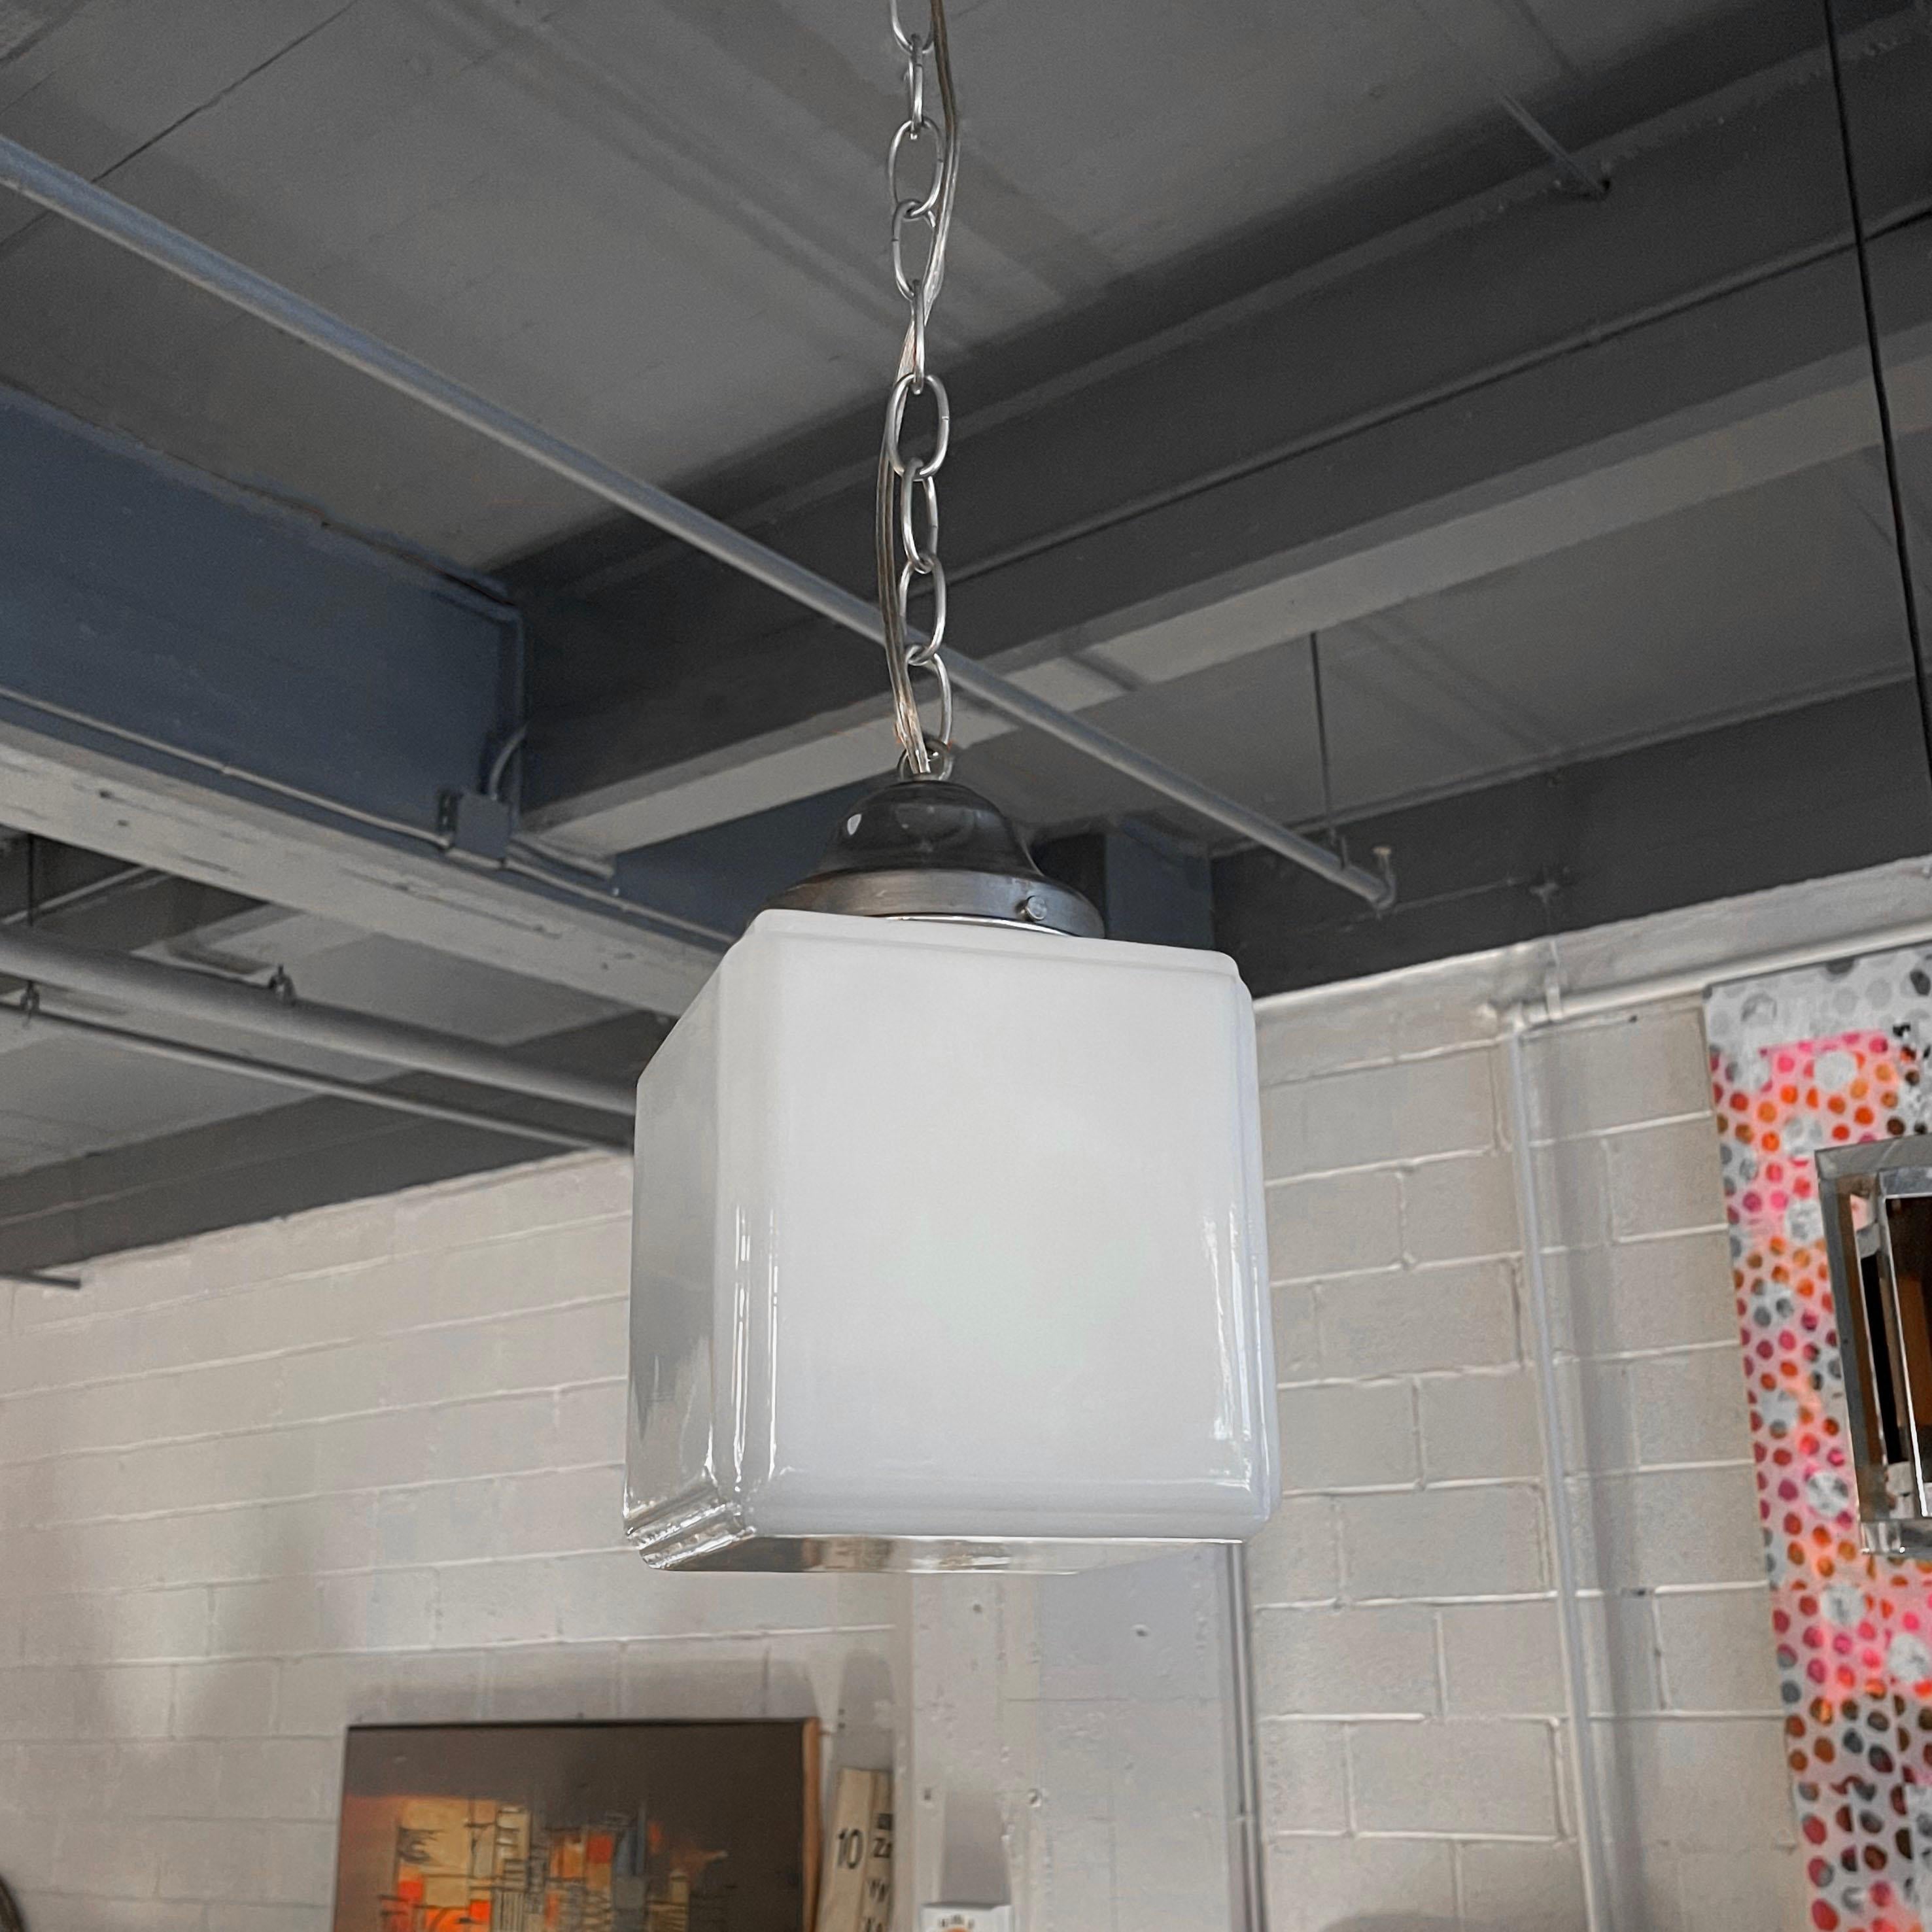 Midcentury pendant light features a 6 inch milk glass cube shade with aluminum fitter on 56 inches of steel chain link to hang at an overall height of 64 inches.